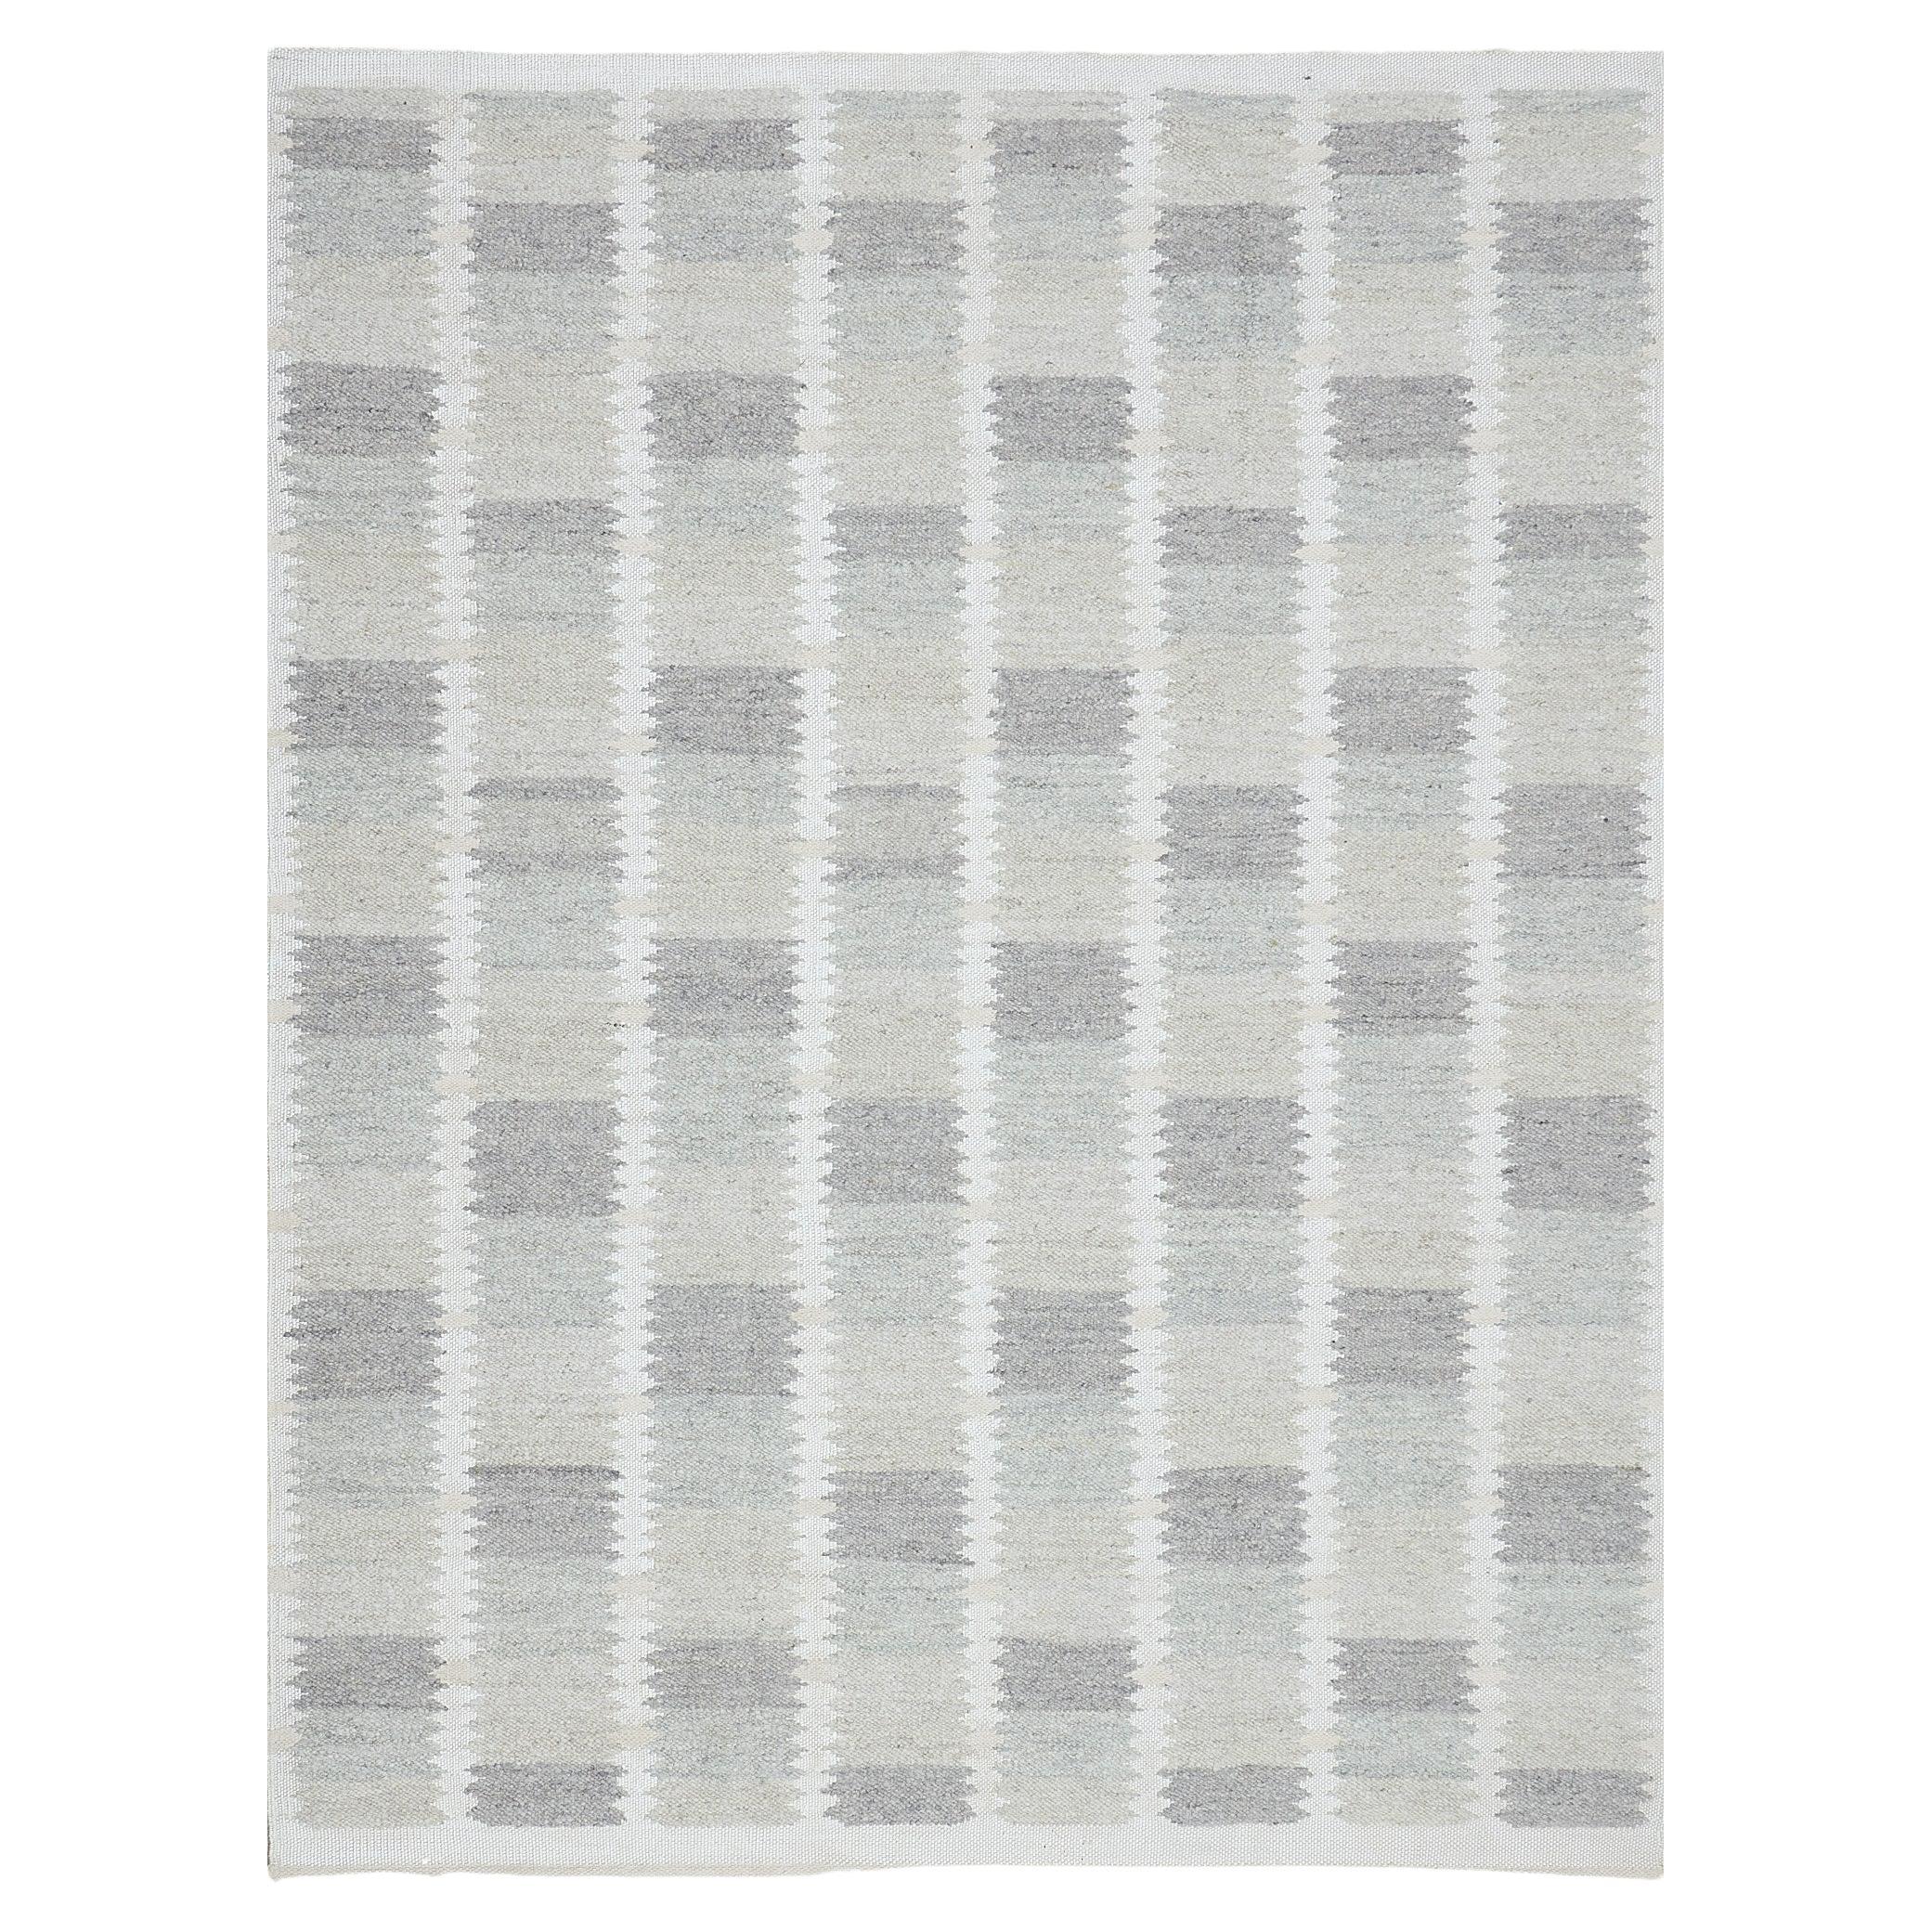 Hand-Woven Contemporary Swedish-Inspired Wool Flat-weave Rug